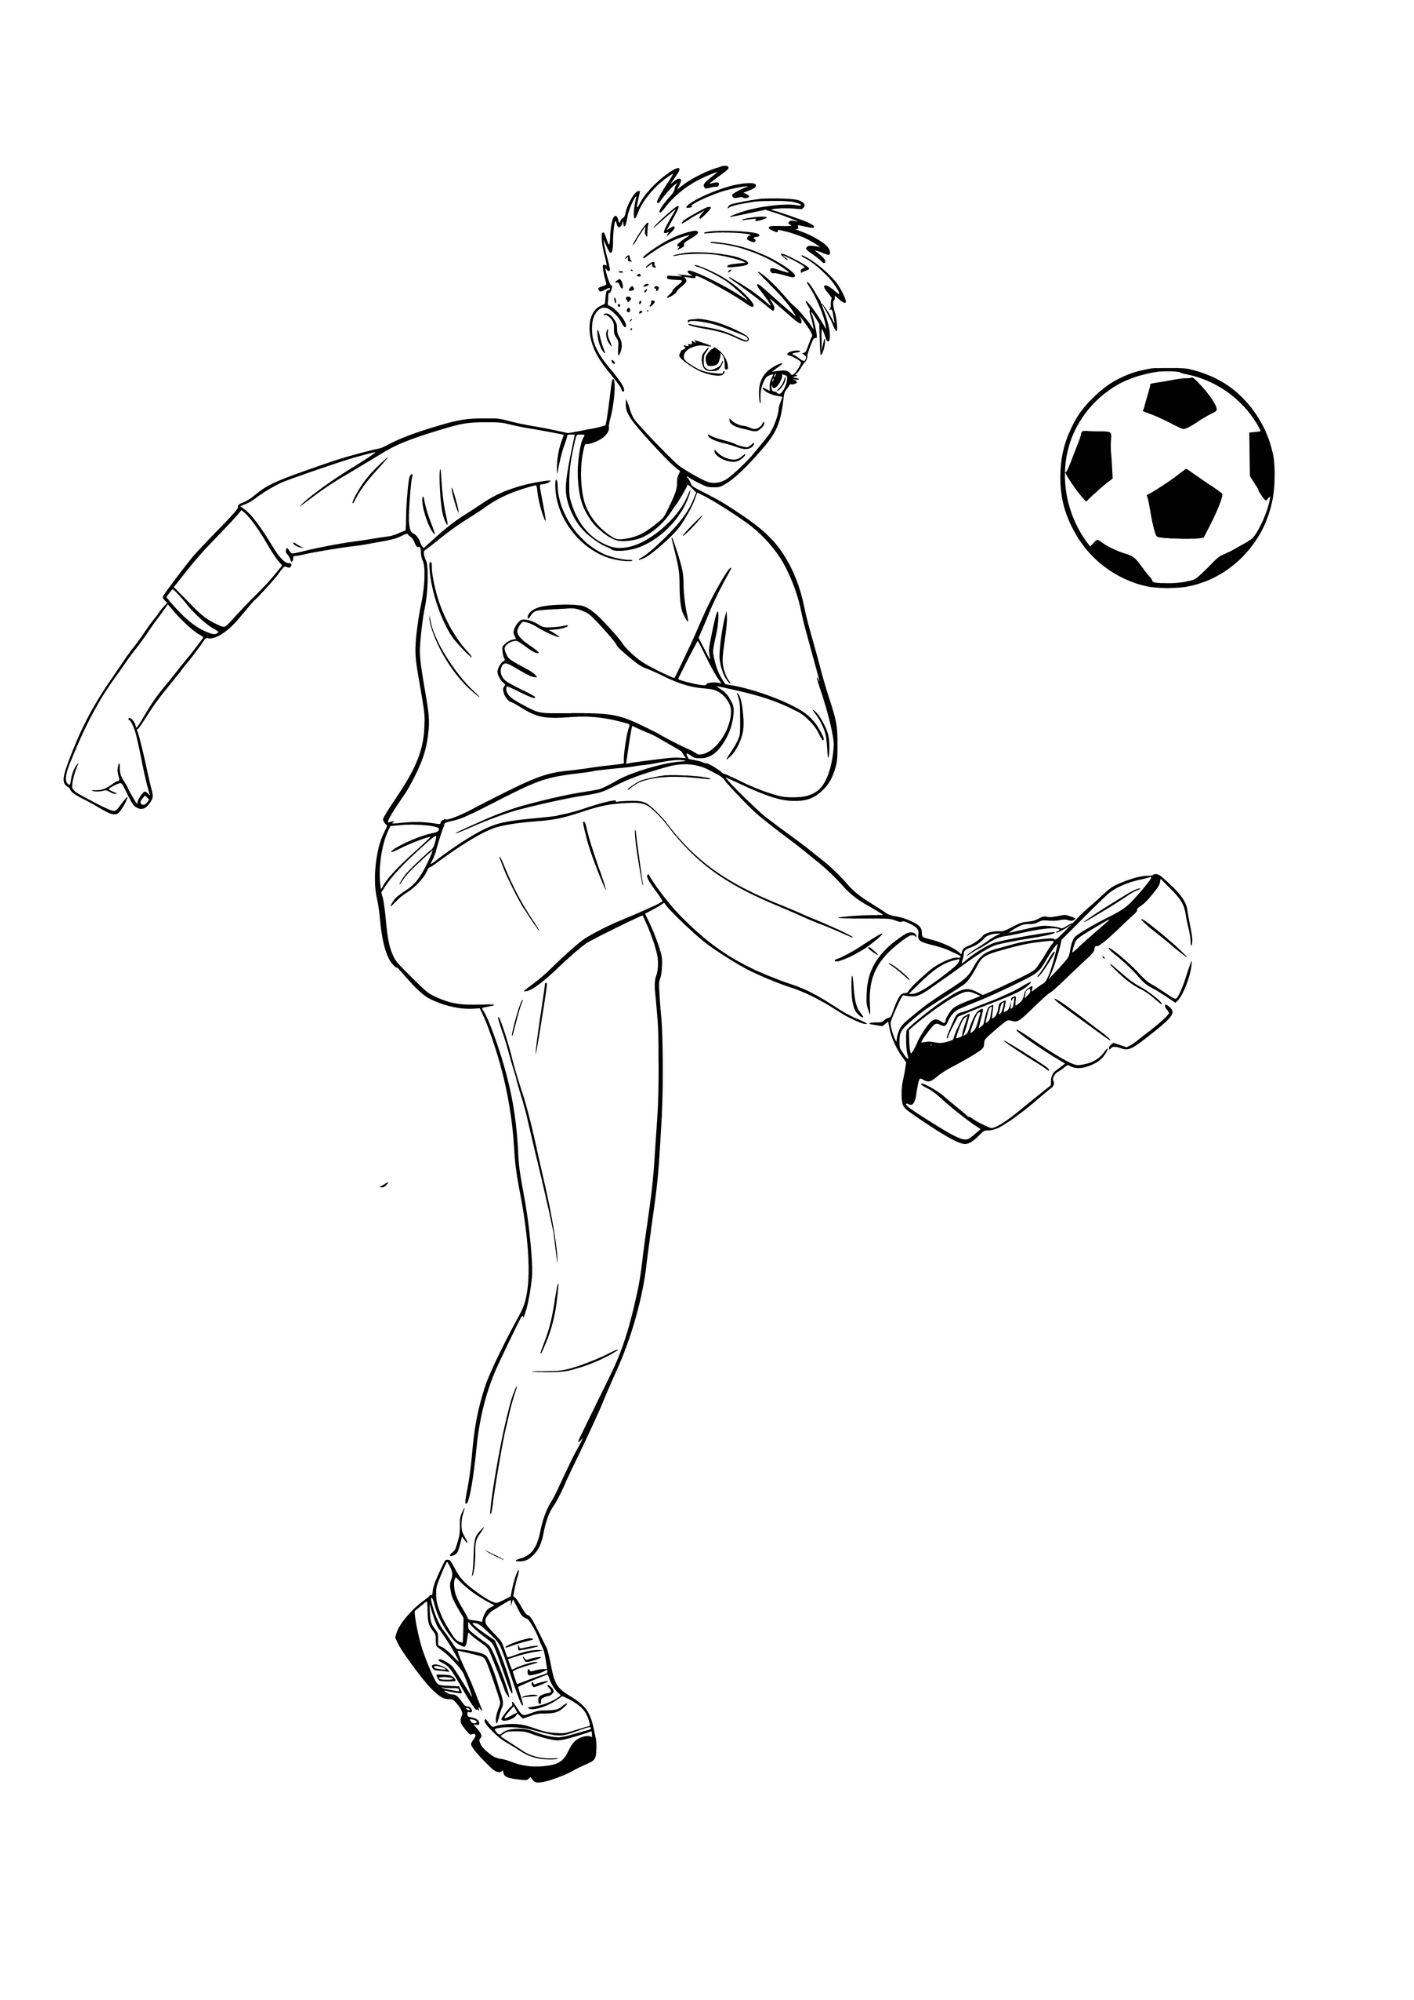 Coloring page boy playing football